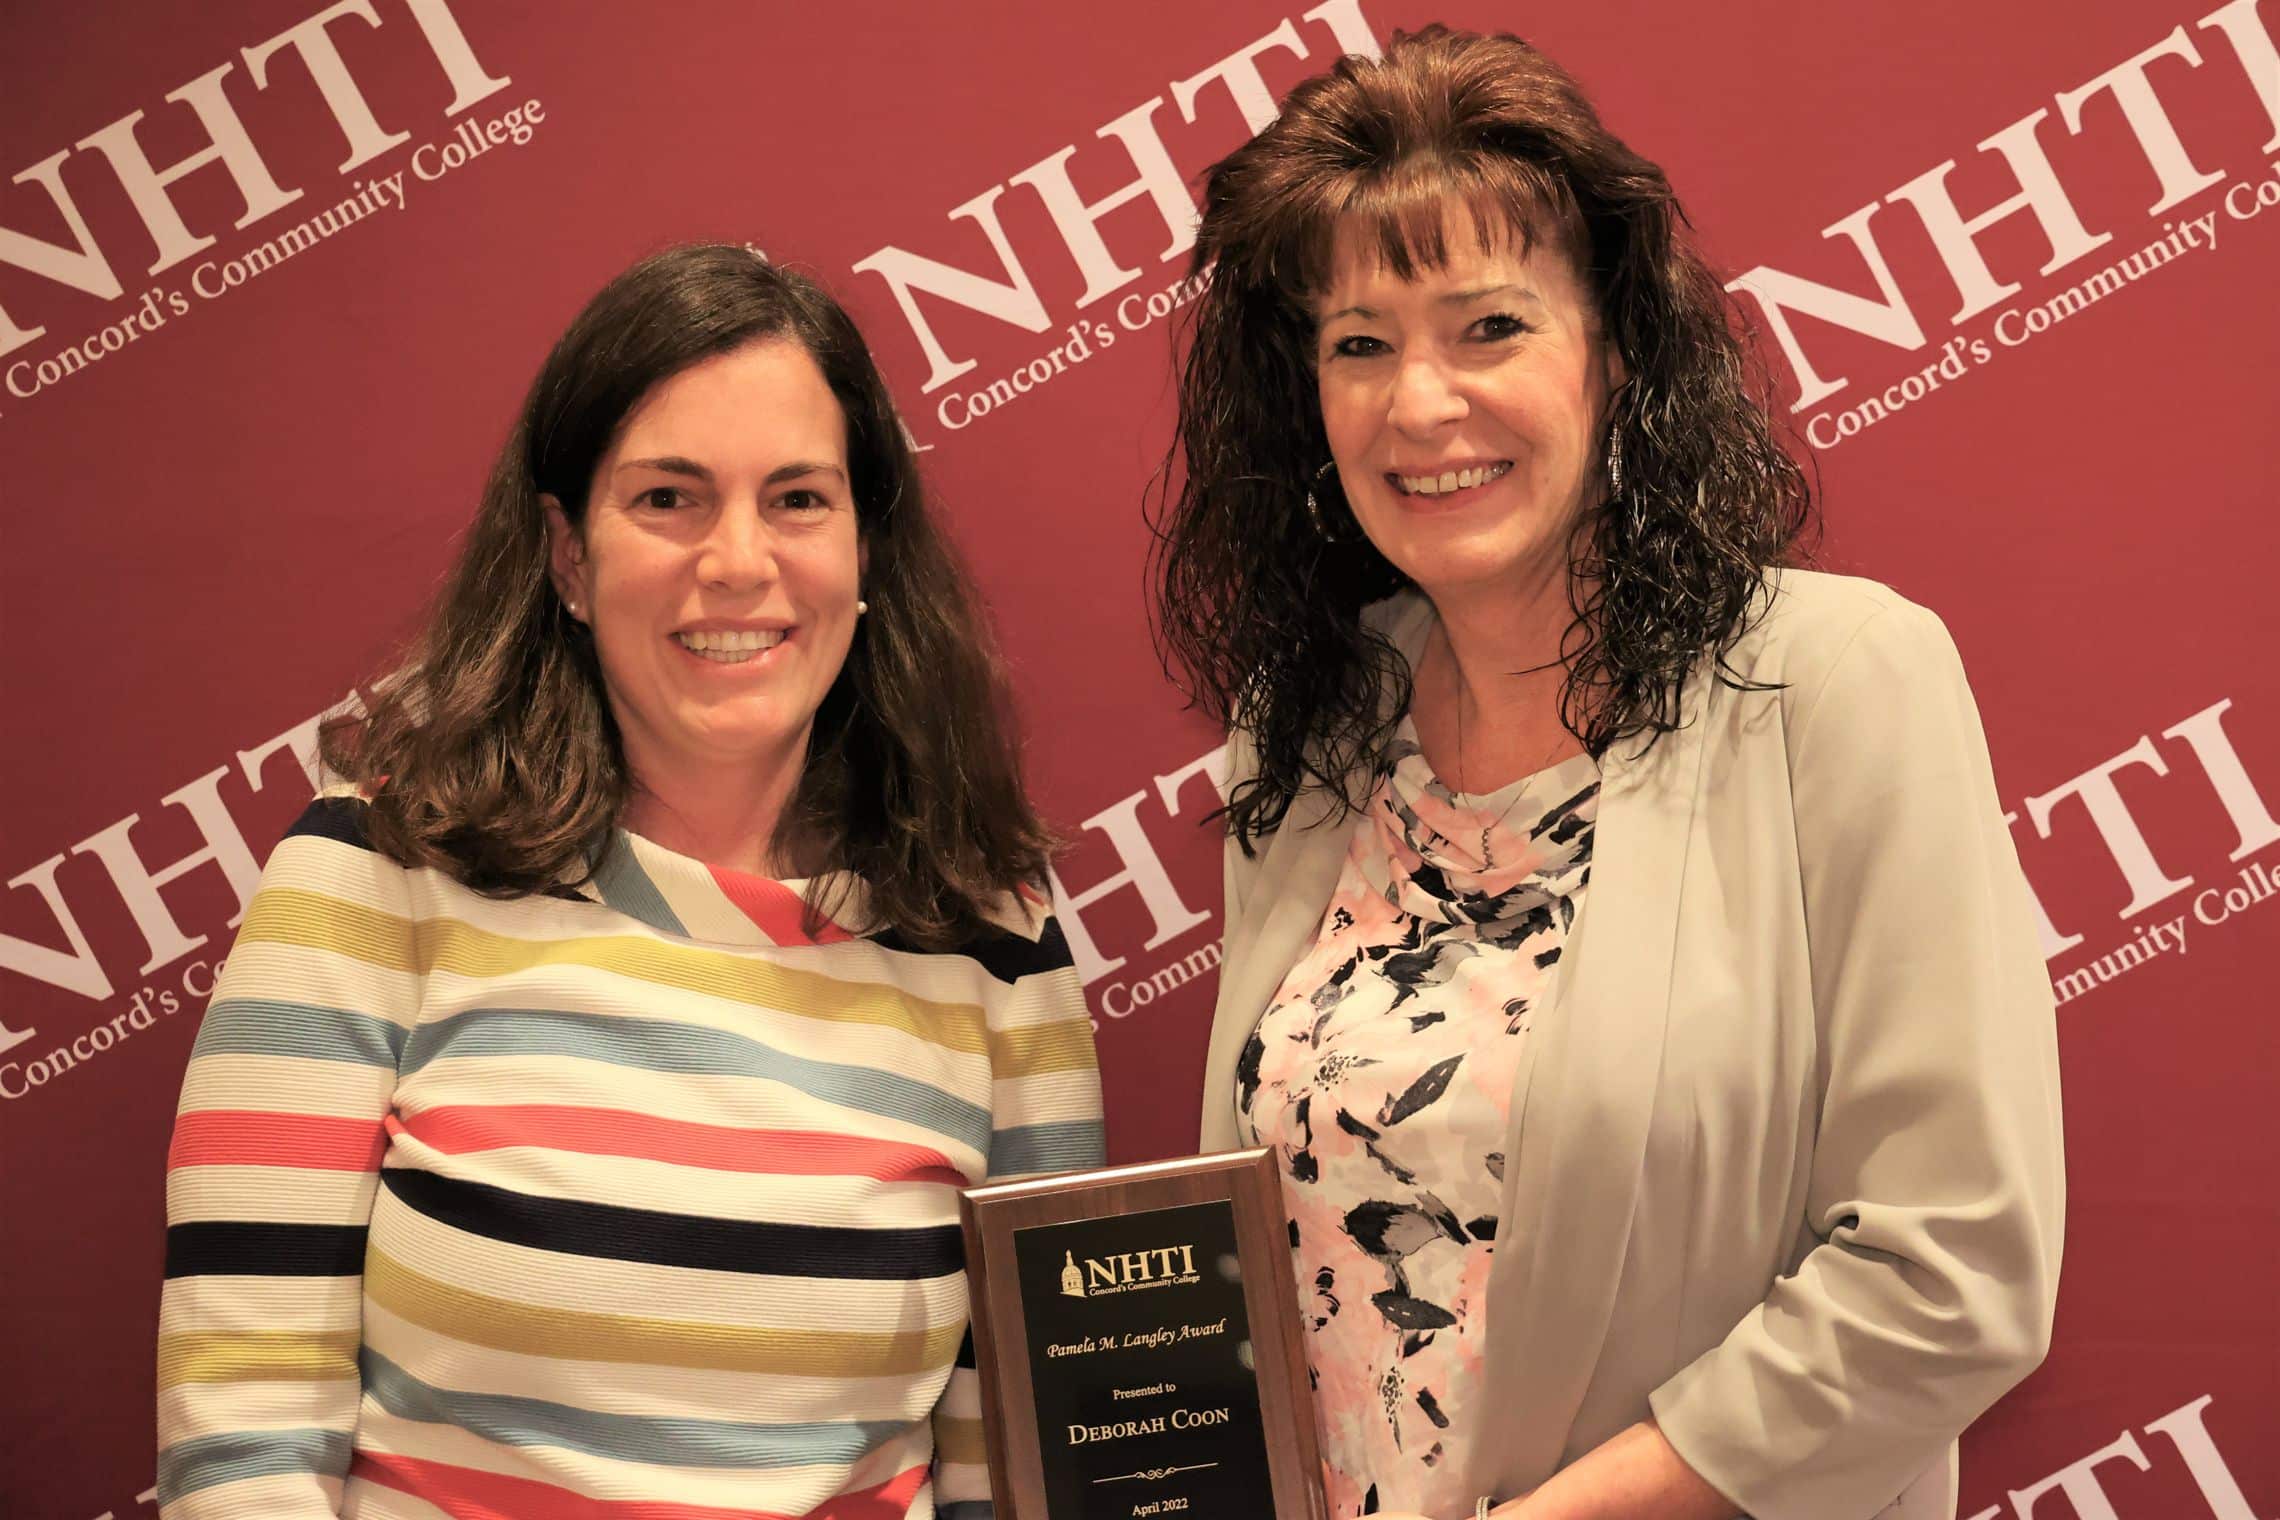 Recent graduate and Environmental Coordinator Deb Coon won the Dr. Pamela M. Langley Award for Exceptional Research in the Natural Sciences. She is pictured here with her award in front of an NHTI backdrop that is red.